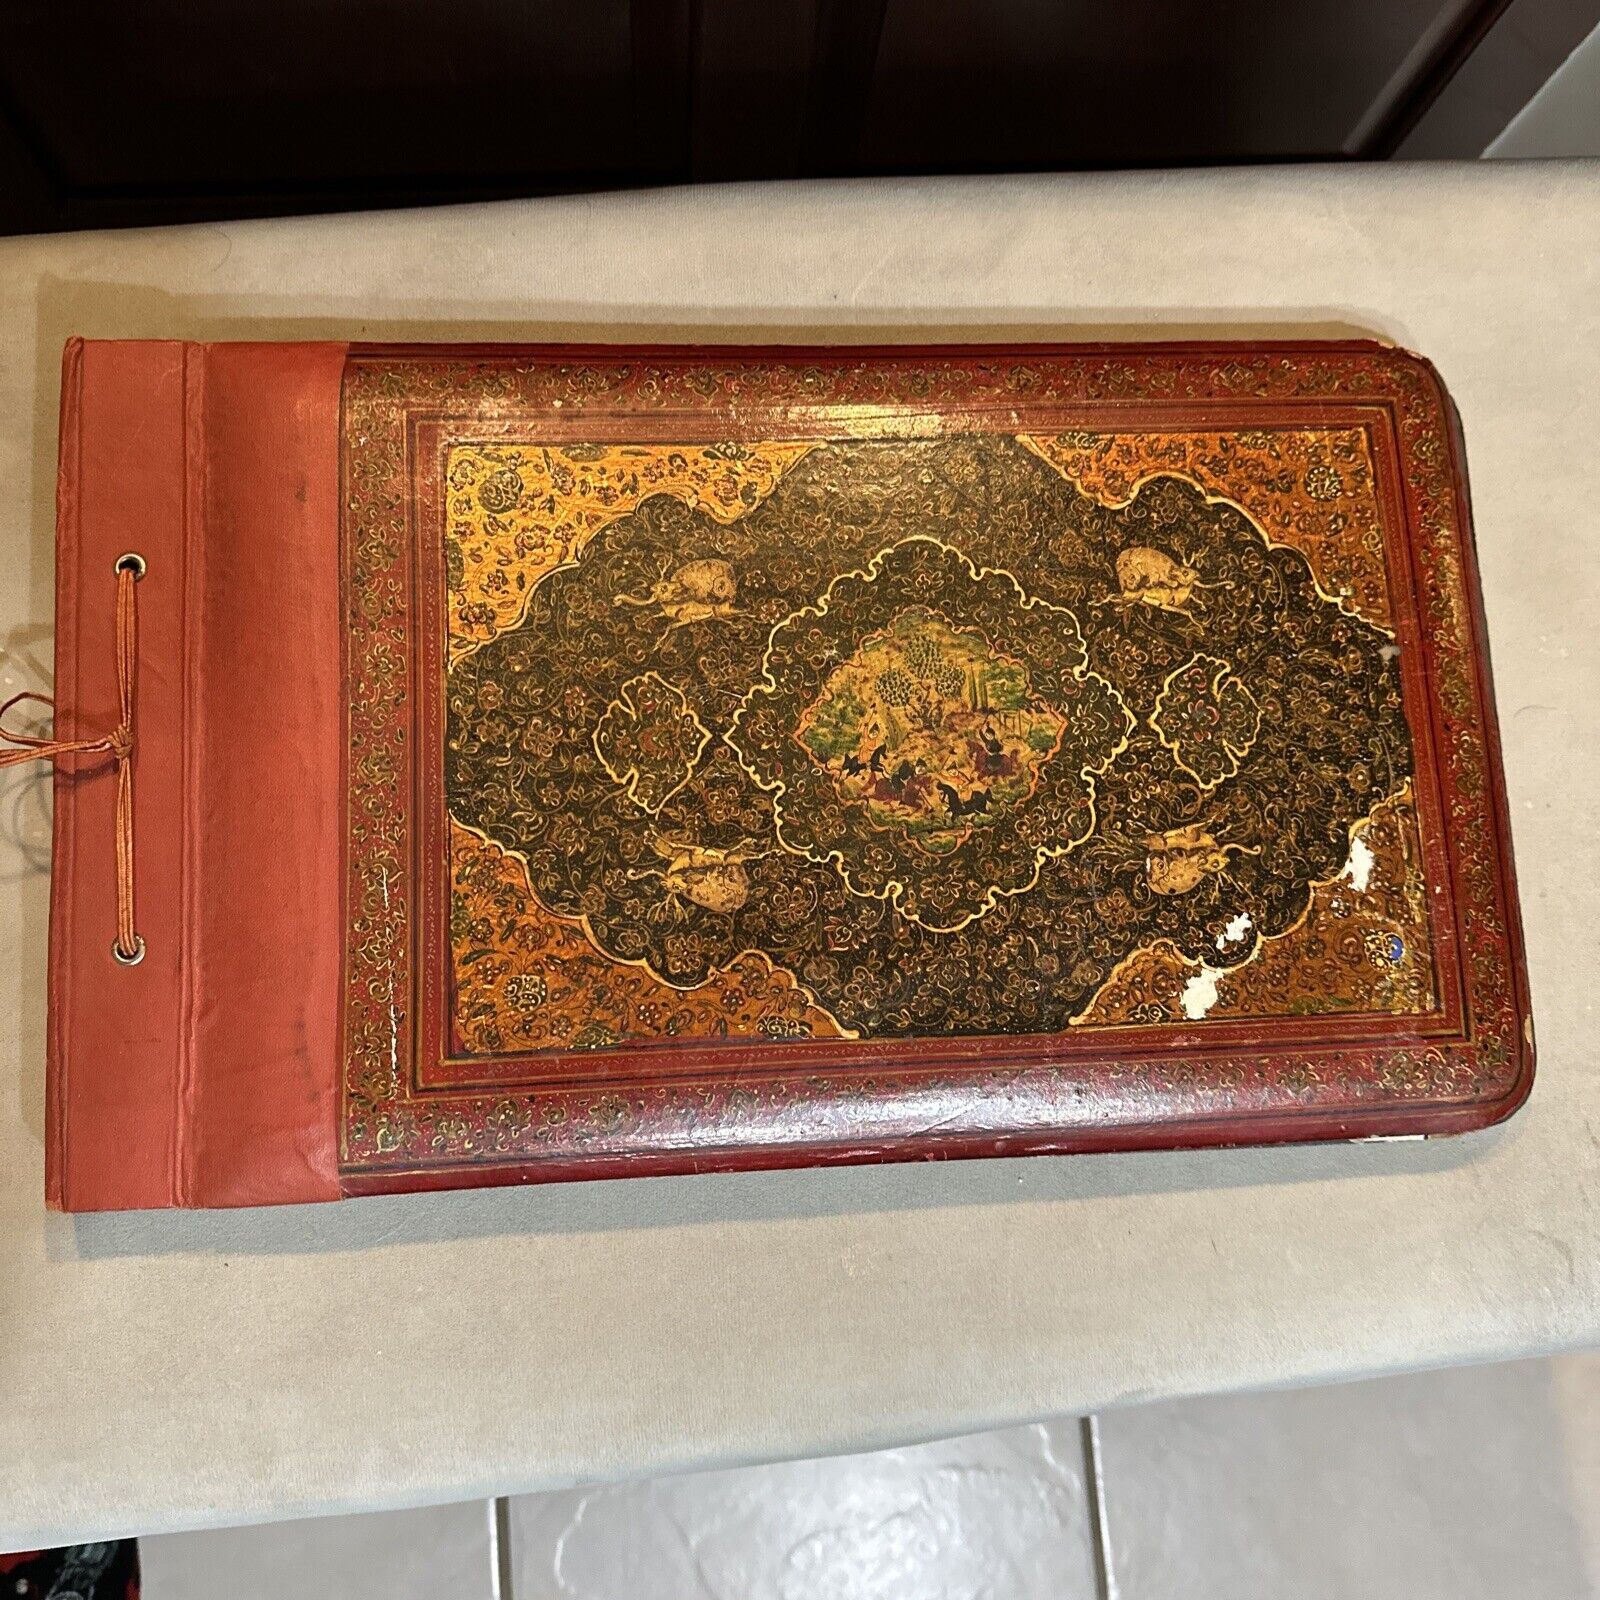 Vintage Persian Photo Album With Wood Covers 16.5”L X 9.5 W Some Chipping, Wear